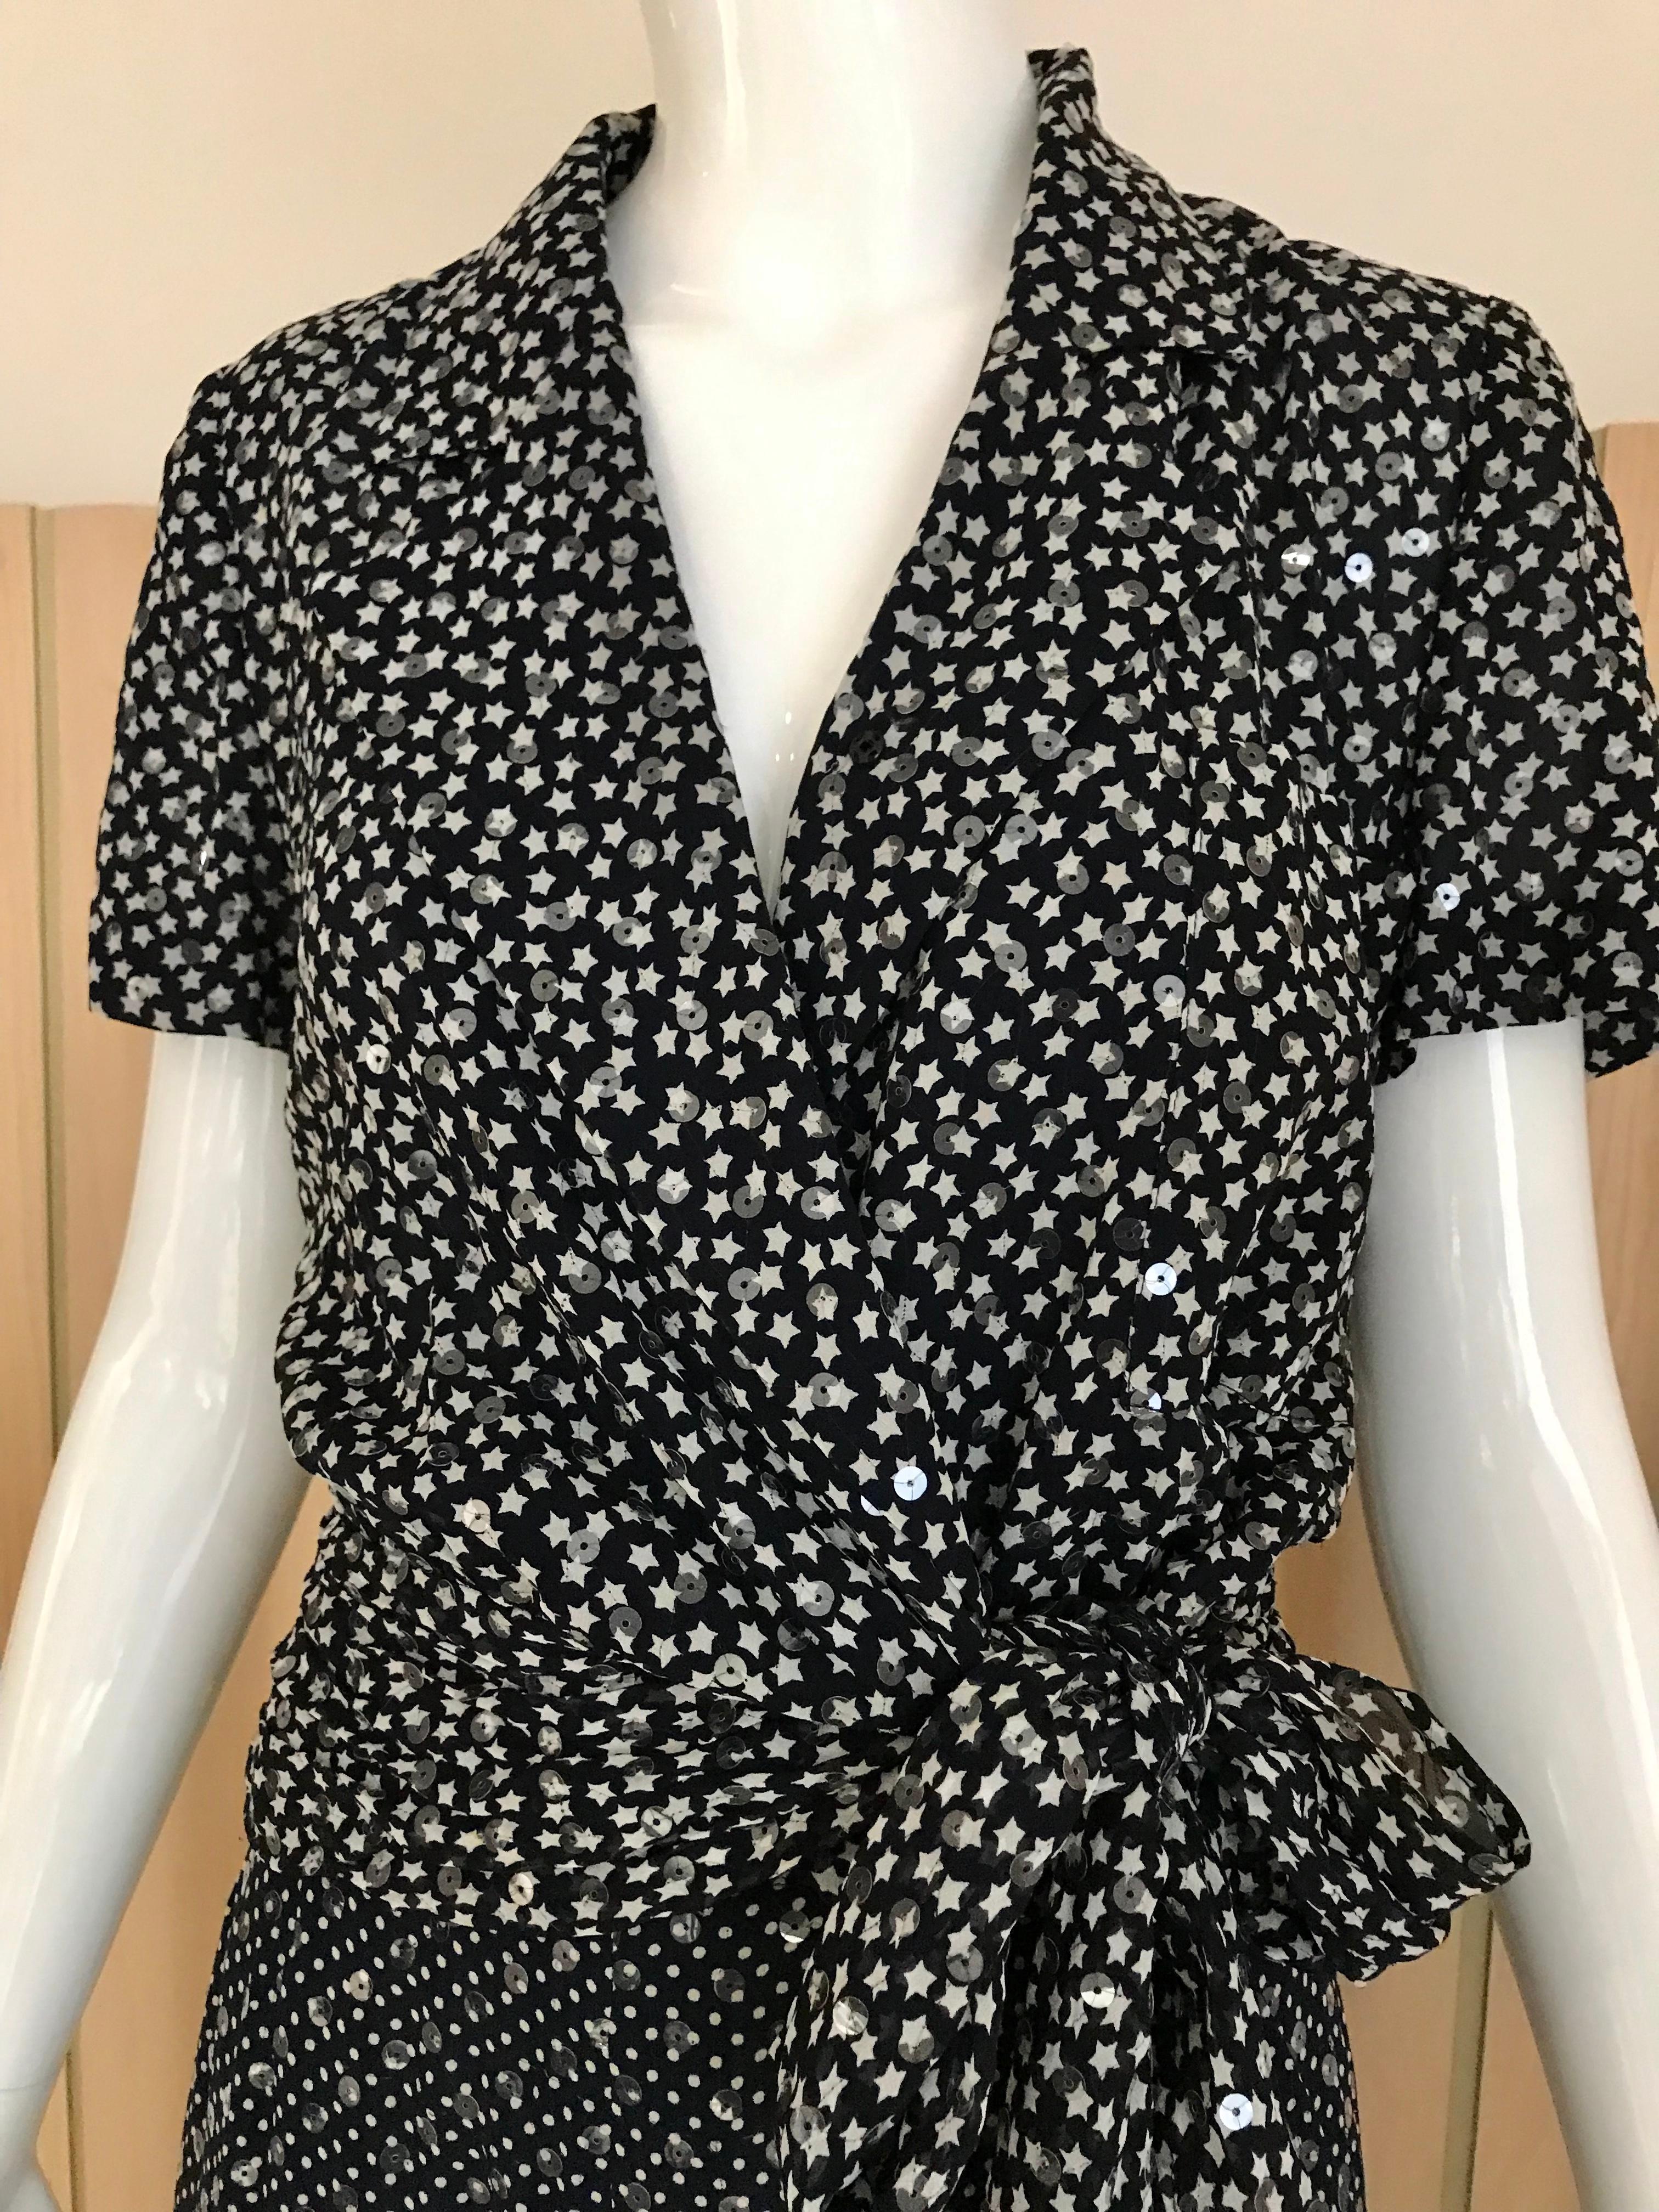 Vintage Navy Blue Jean Louis scherrer silk wrap blouse with star print and polkadot print pants.
Size: 2/ XS
Blouse fit size 4
Pants waist is 24 inches/ XS